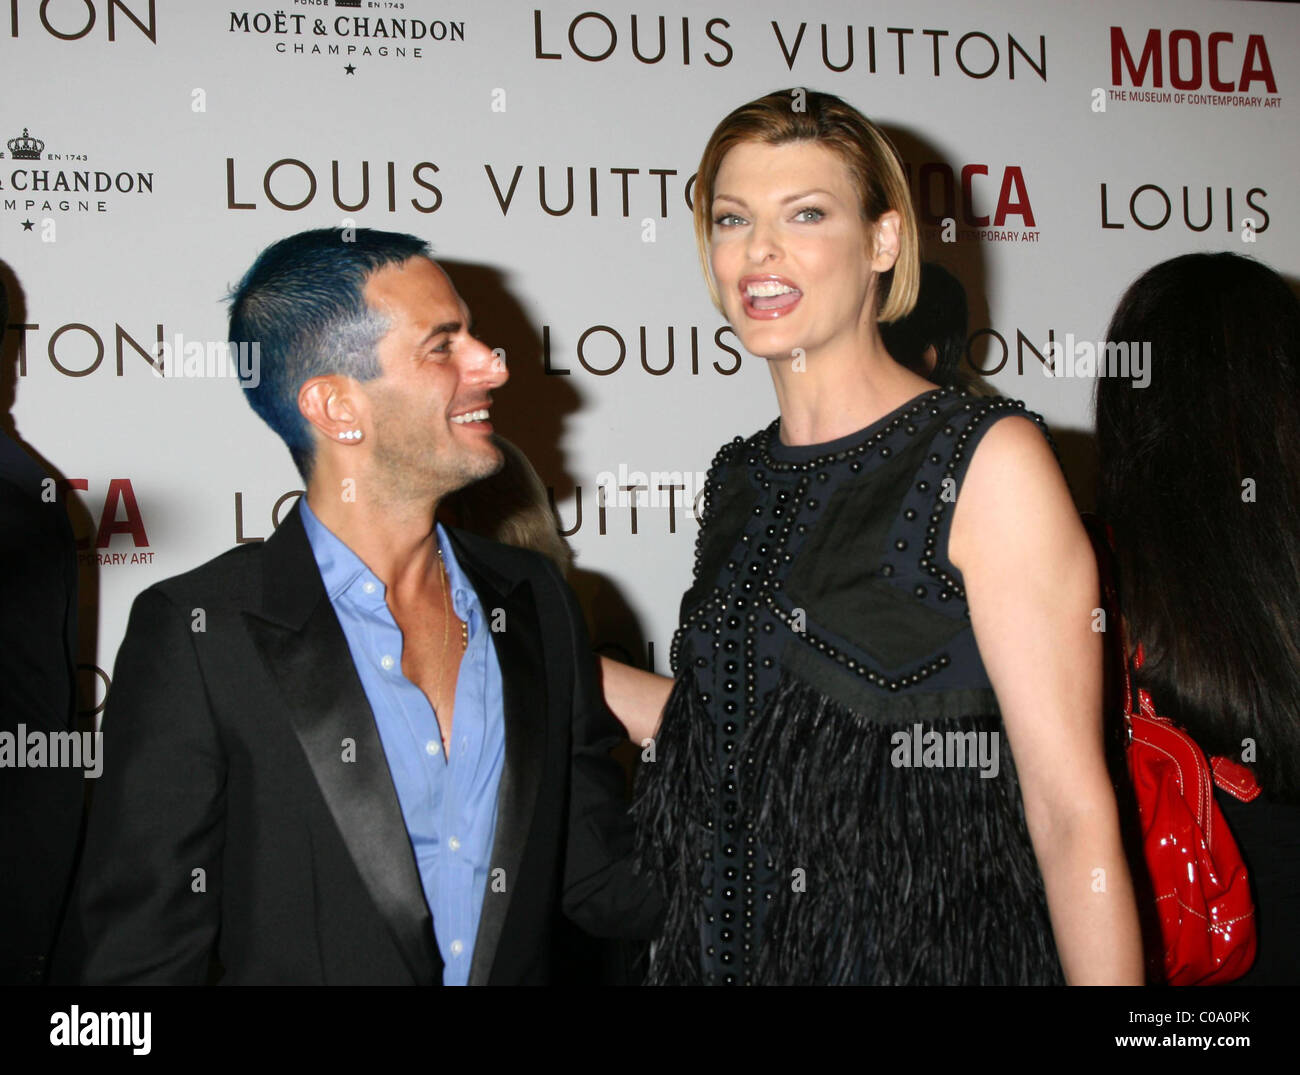 marc jacobs and louis vuitton documentary